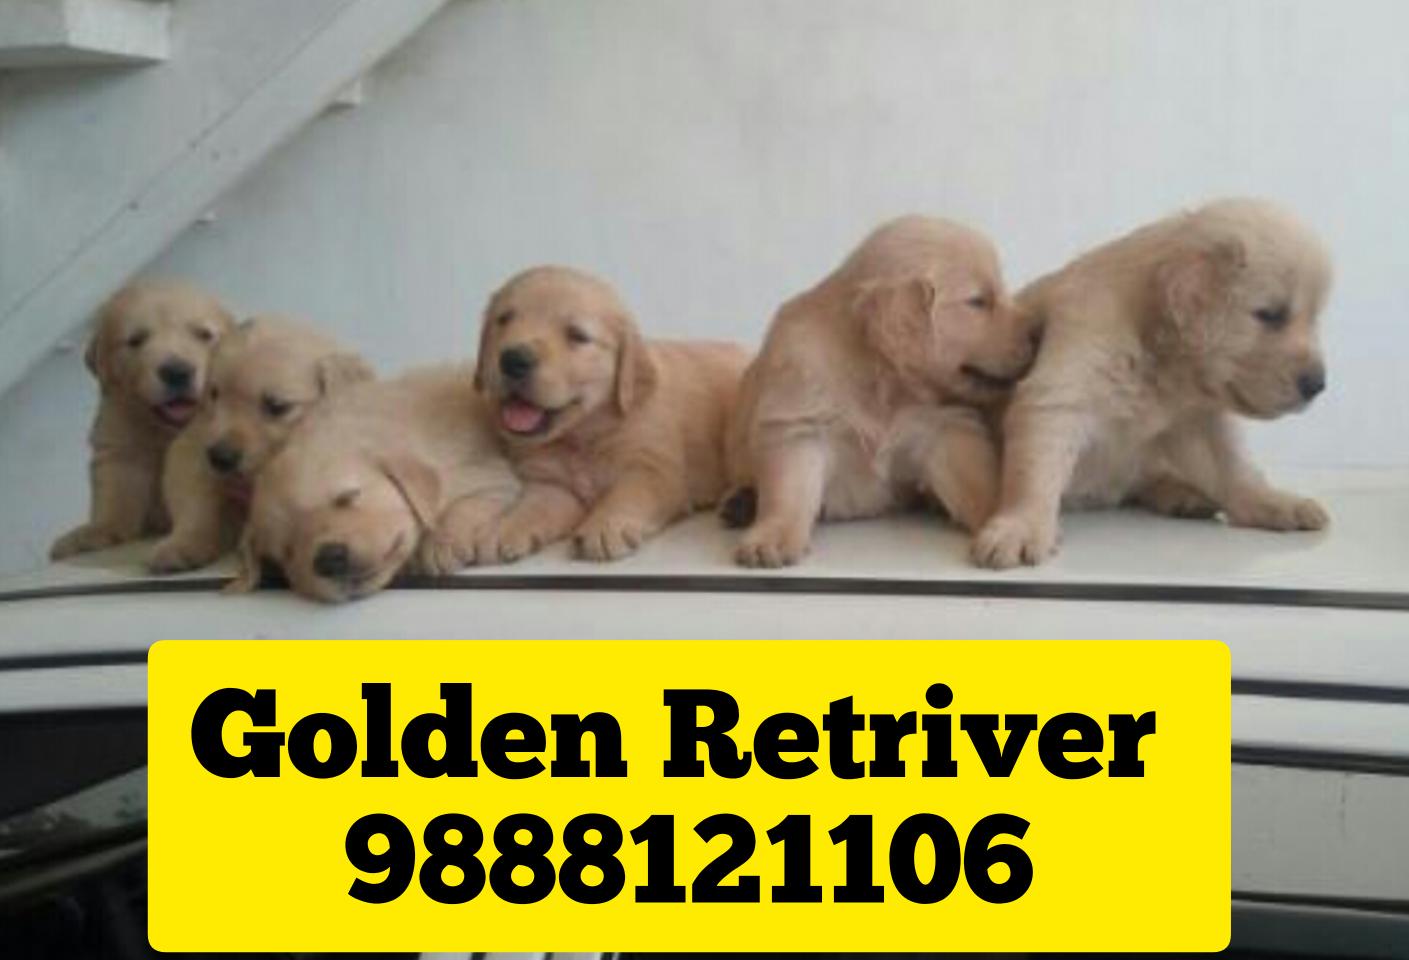 Golden Retriver puppy available call 9888121106